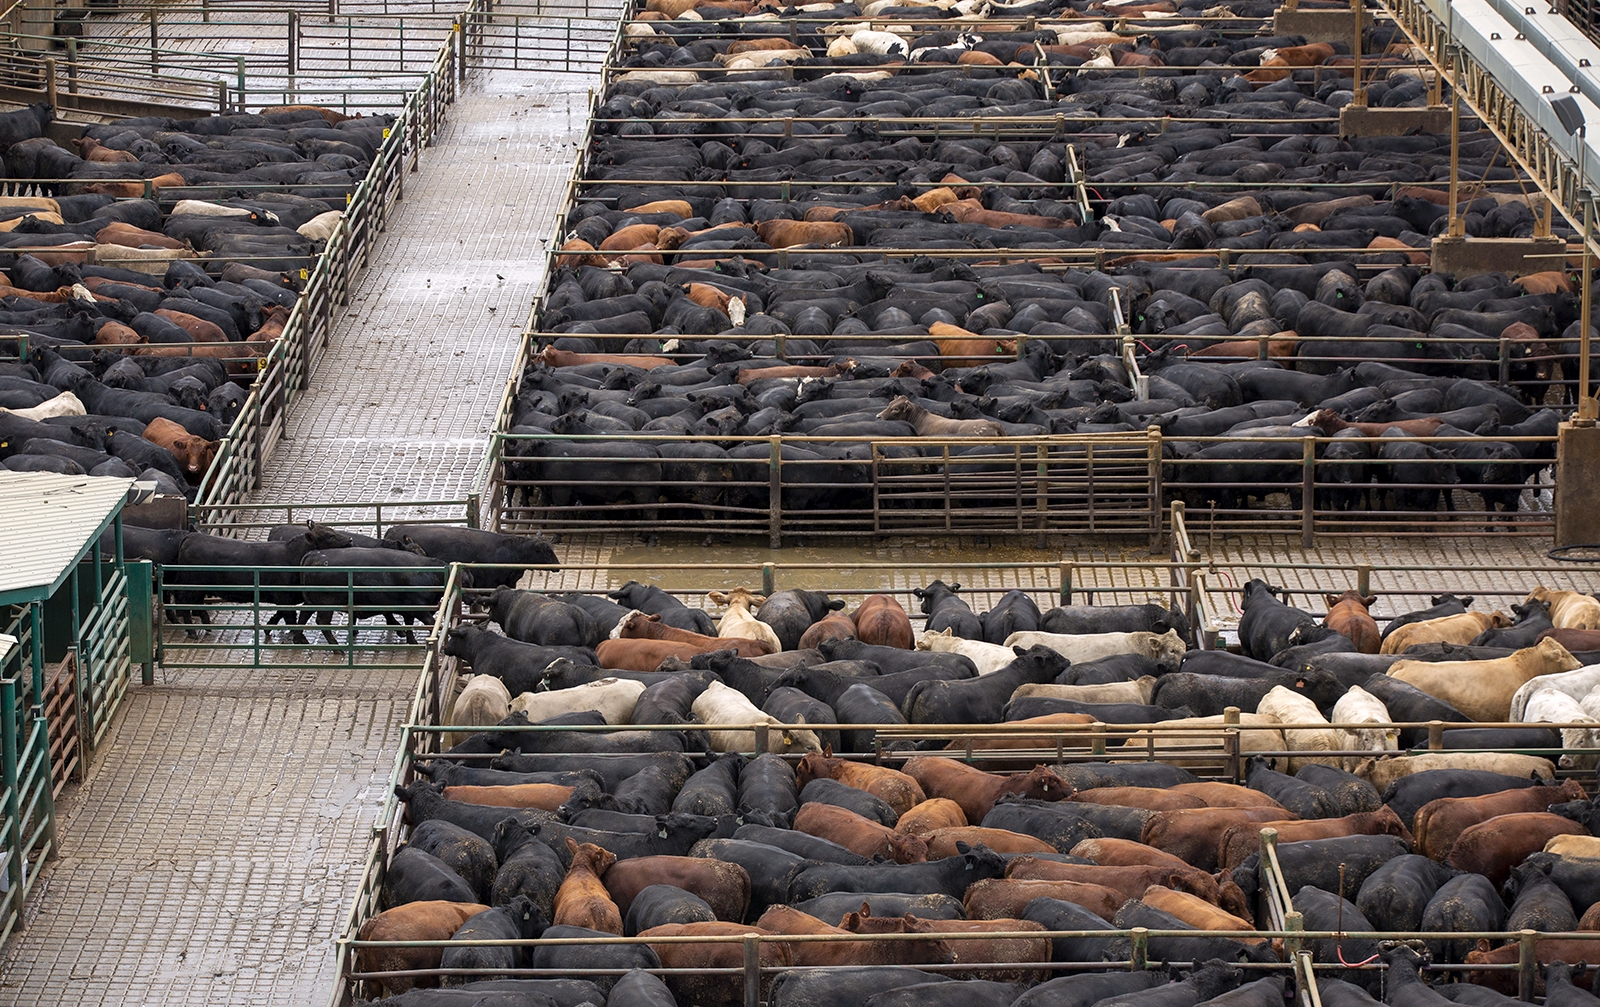 Cattle in pens just outside a slaughter house.